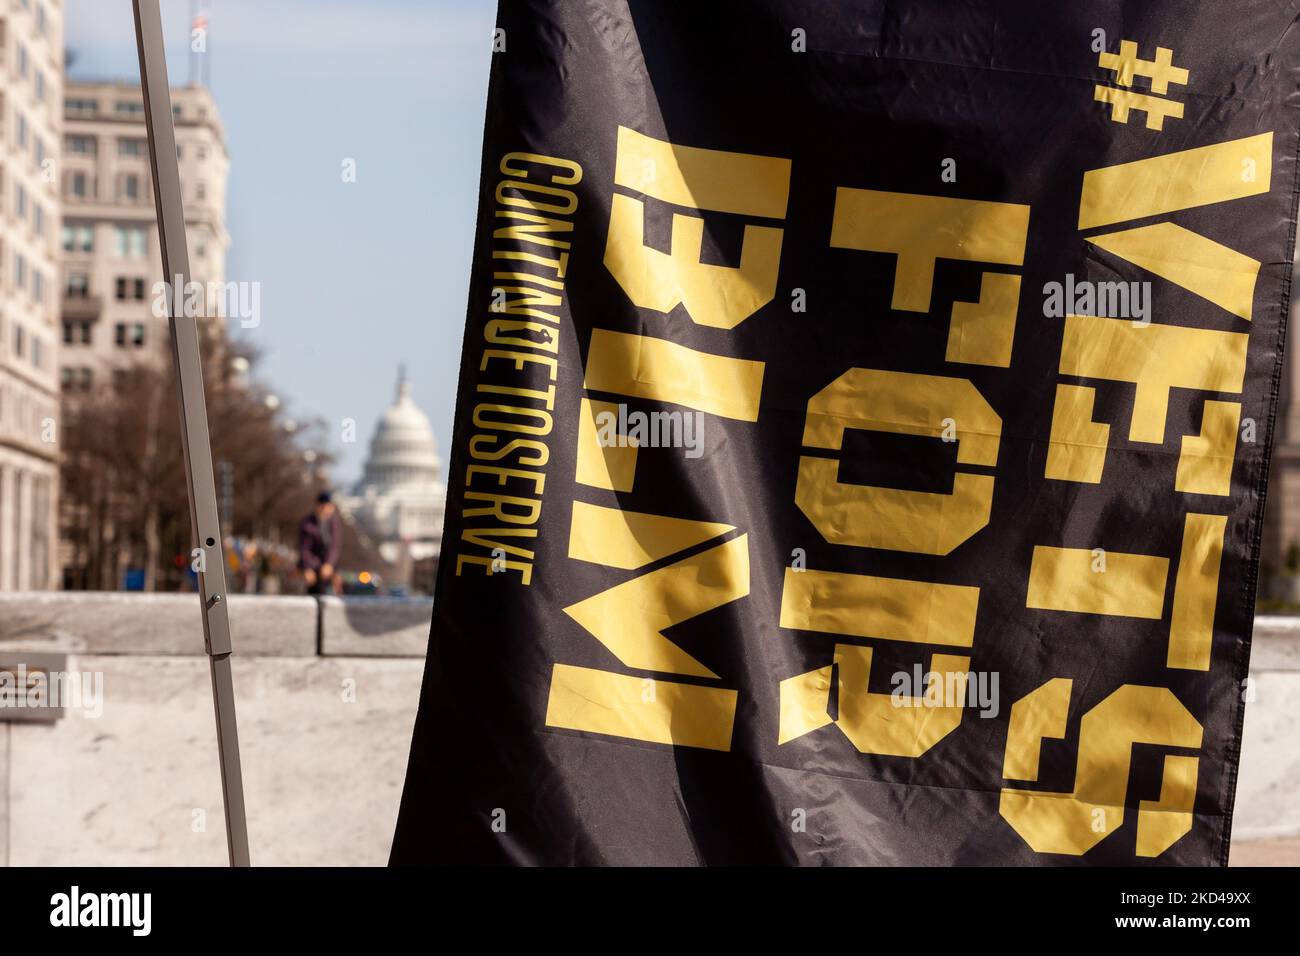 A #VetsforBLM flag hangs in Freedom Plaza during a rally against white nationalism hosted by military veteran organizations Continue to Serve and Common Defense. Organizers held the rally to counter messaging from some in the trucker convoy near Washington. (Photo by Allison Bailey/NurPhoto) Stock Photo